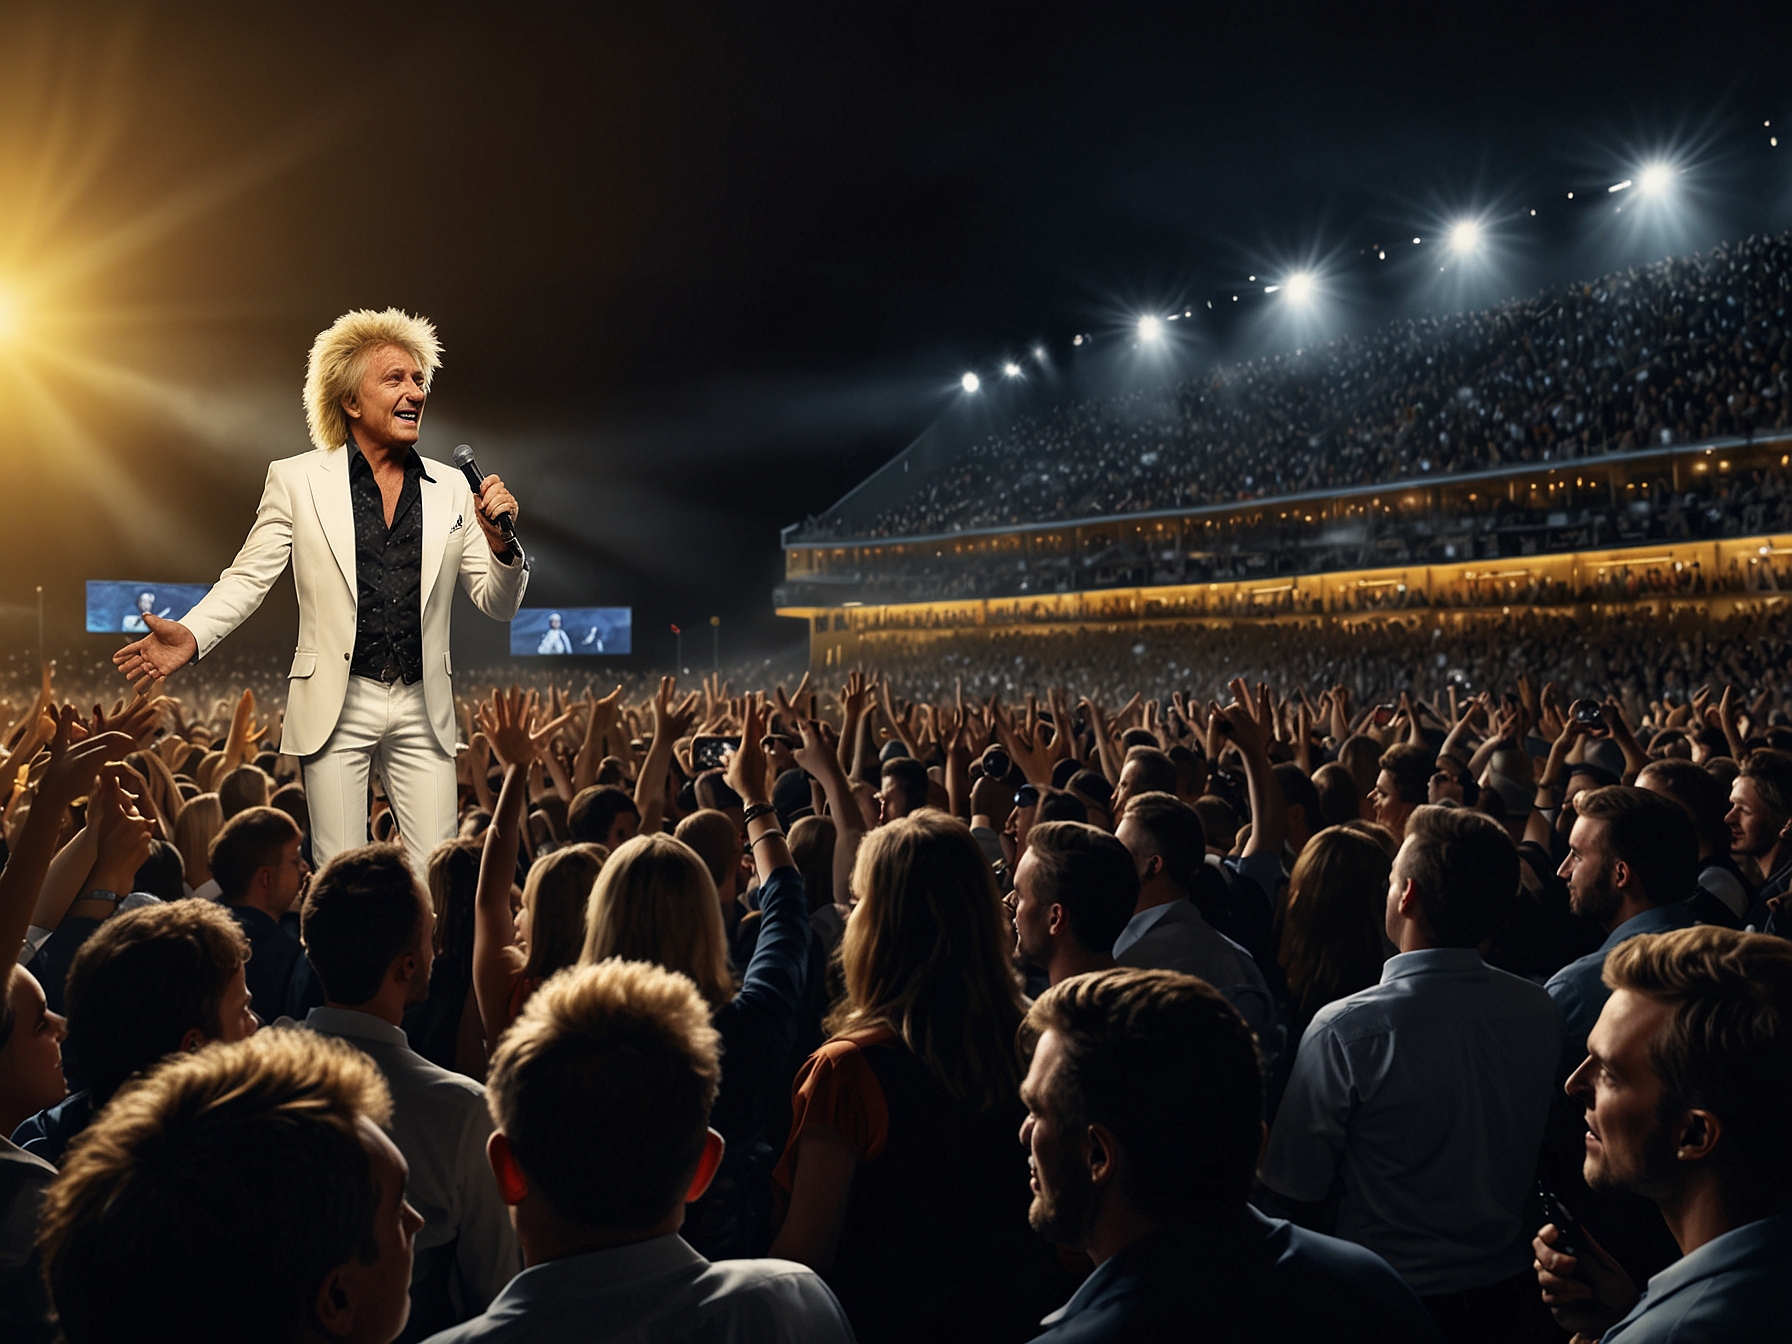 Crowd at Rod Stewart's concert in Germany, some booing while photos of Zelenskyy are displayed.